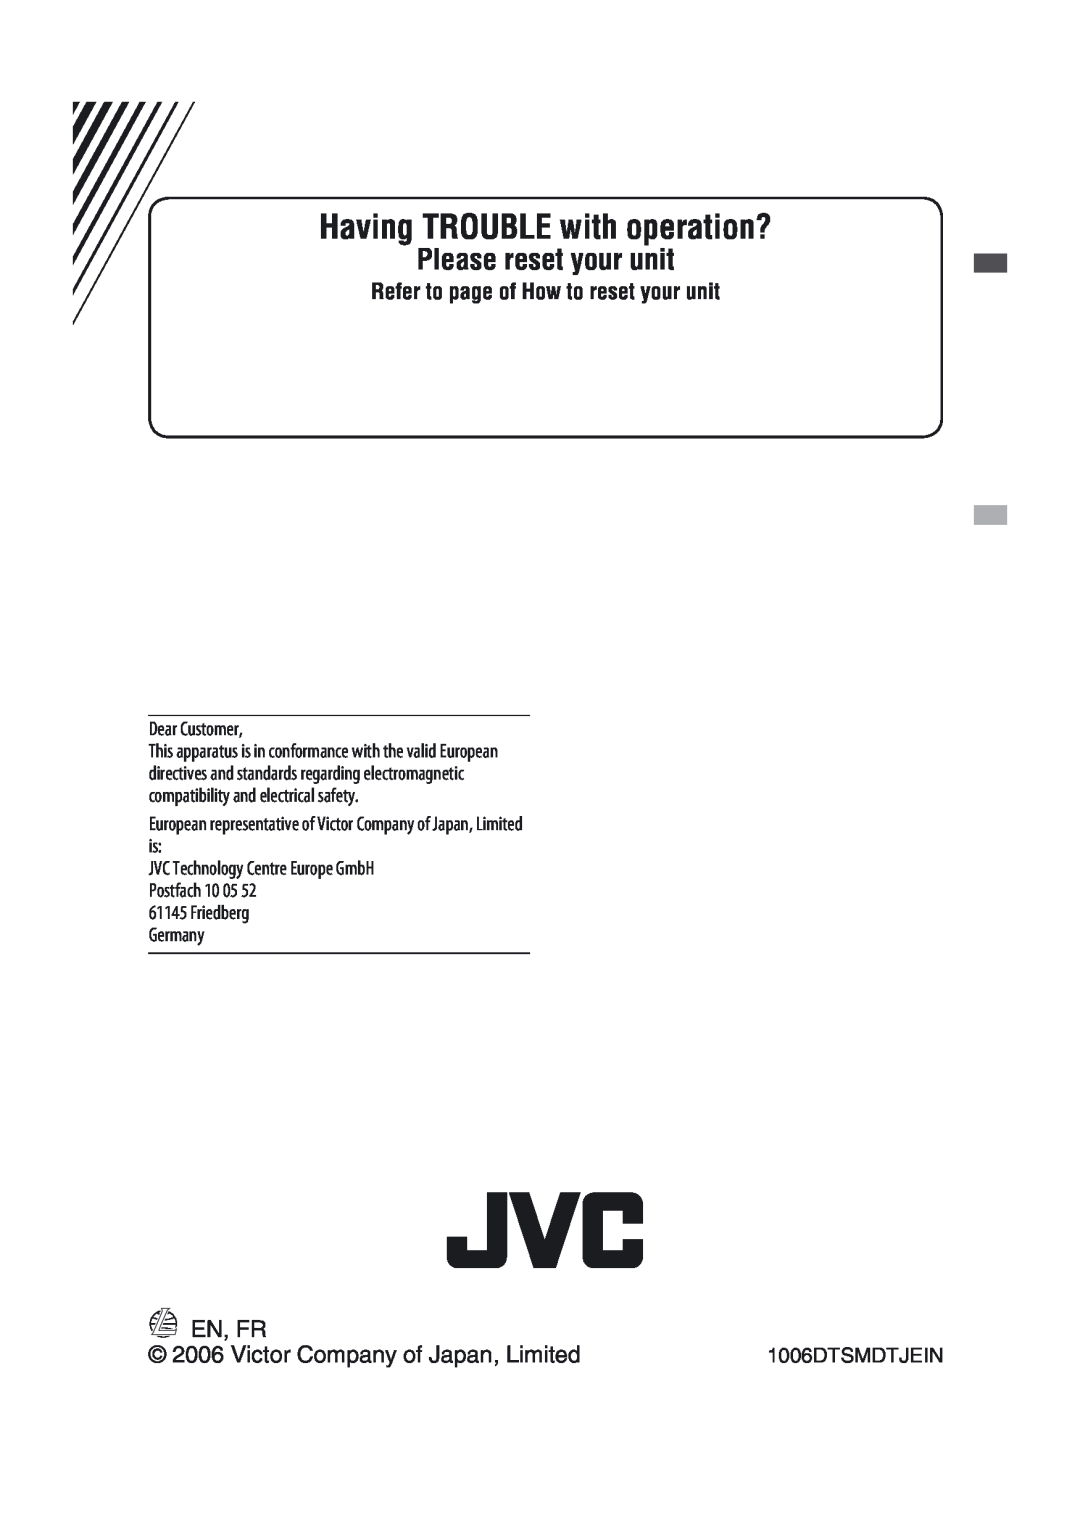 JVC KD-G431 manual En, Fr, Victor Company of Japan, Limited, Having TROUBLE with operation?, Please reset your unit 